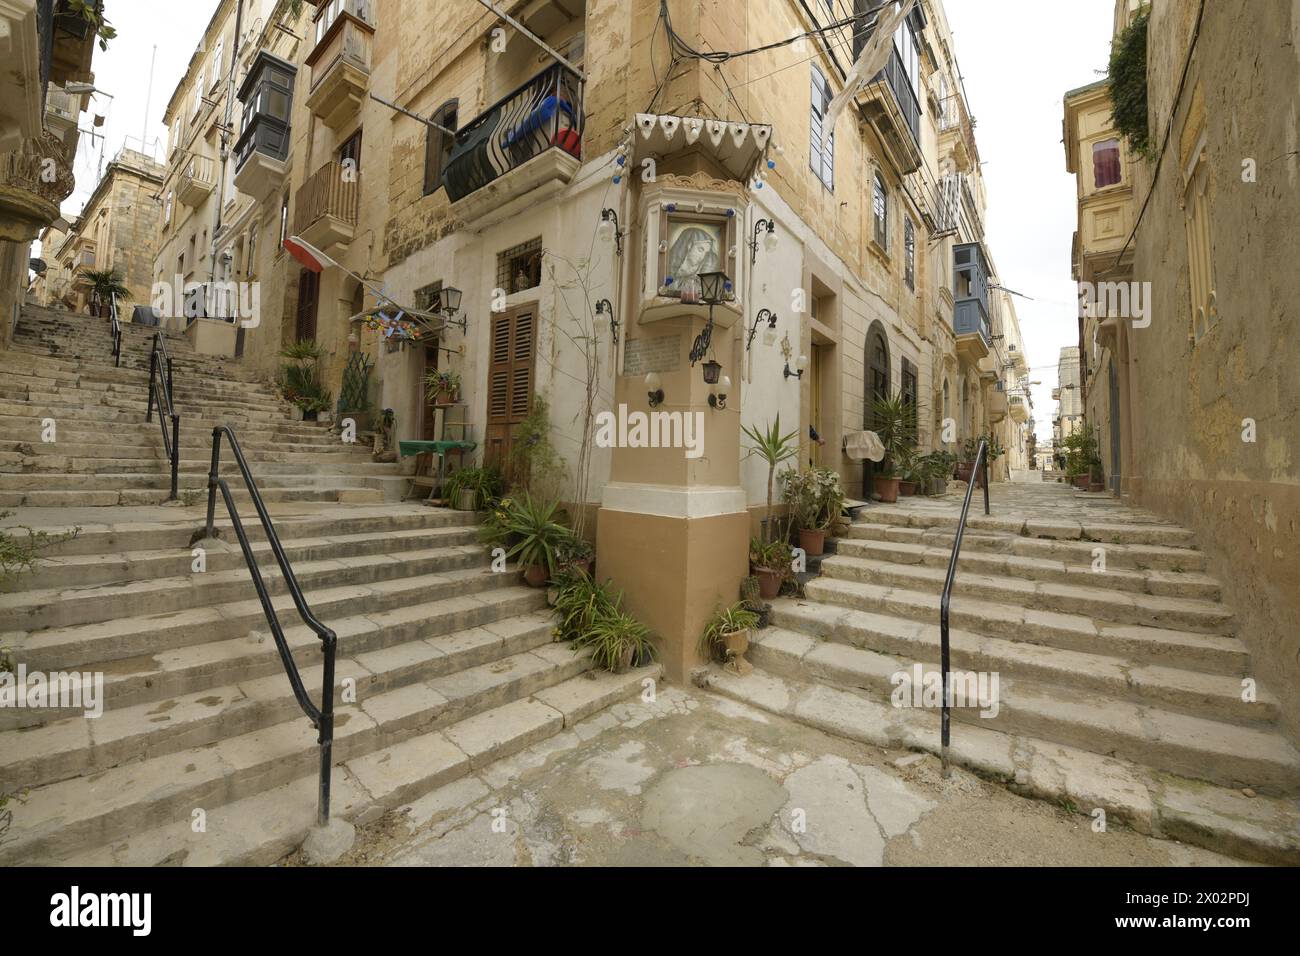 Corner with stairs and picture of the Virgin Mary on a street in Senglea, Malta, Mediterranean, Europe Stock Photo